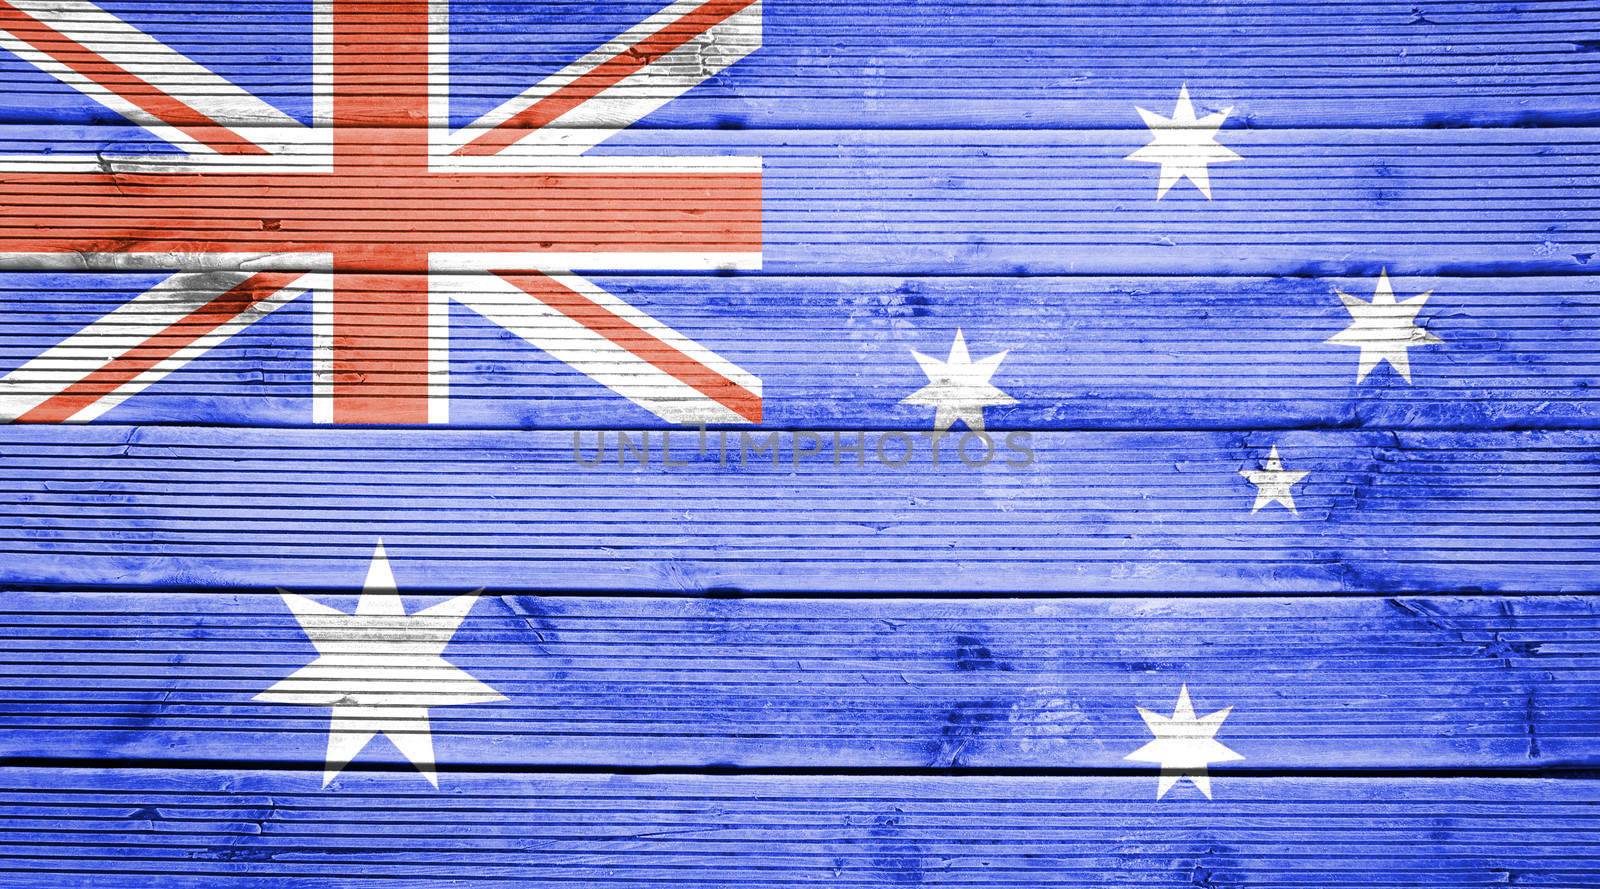 Natural wood planks texture background with the colors of the flag of Australia